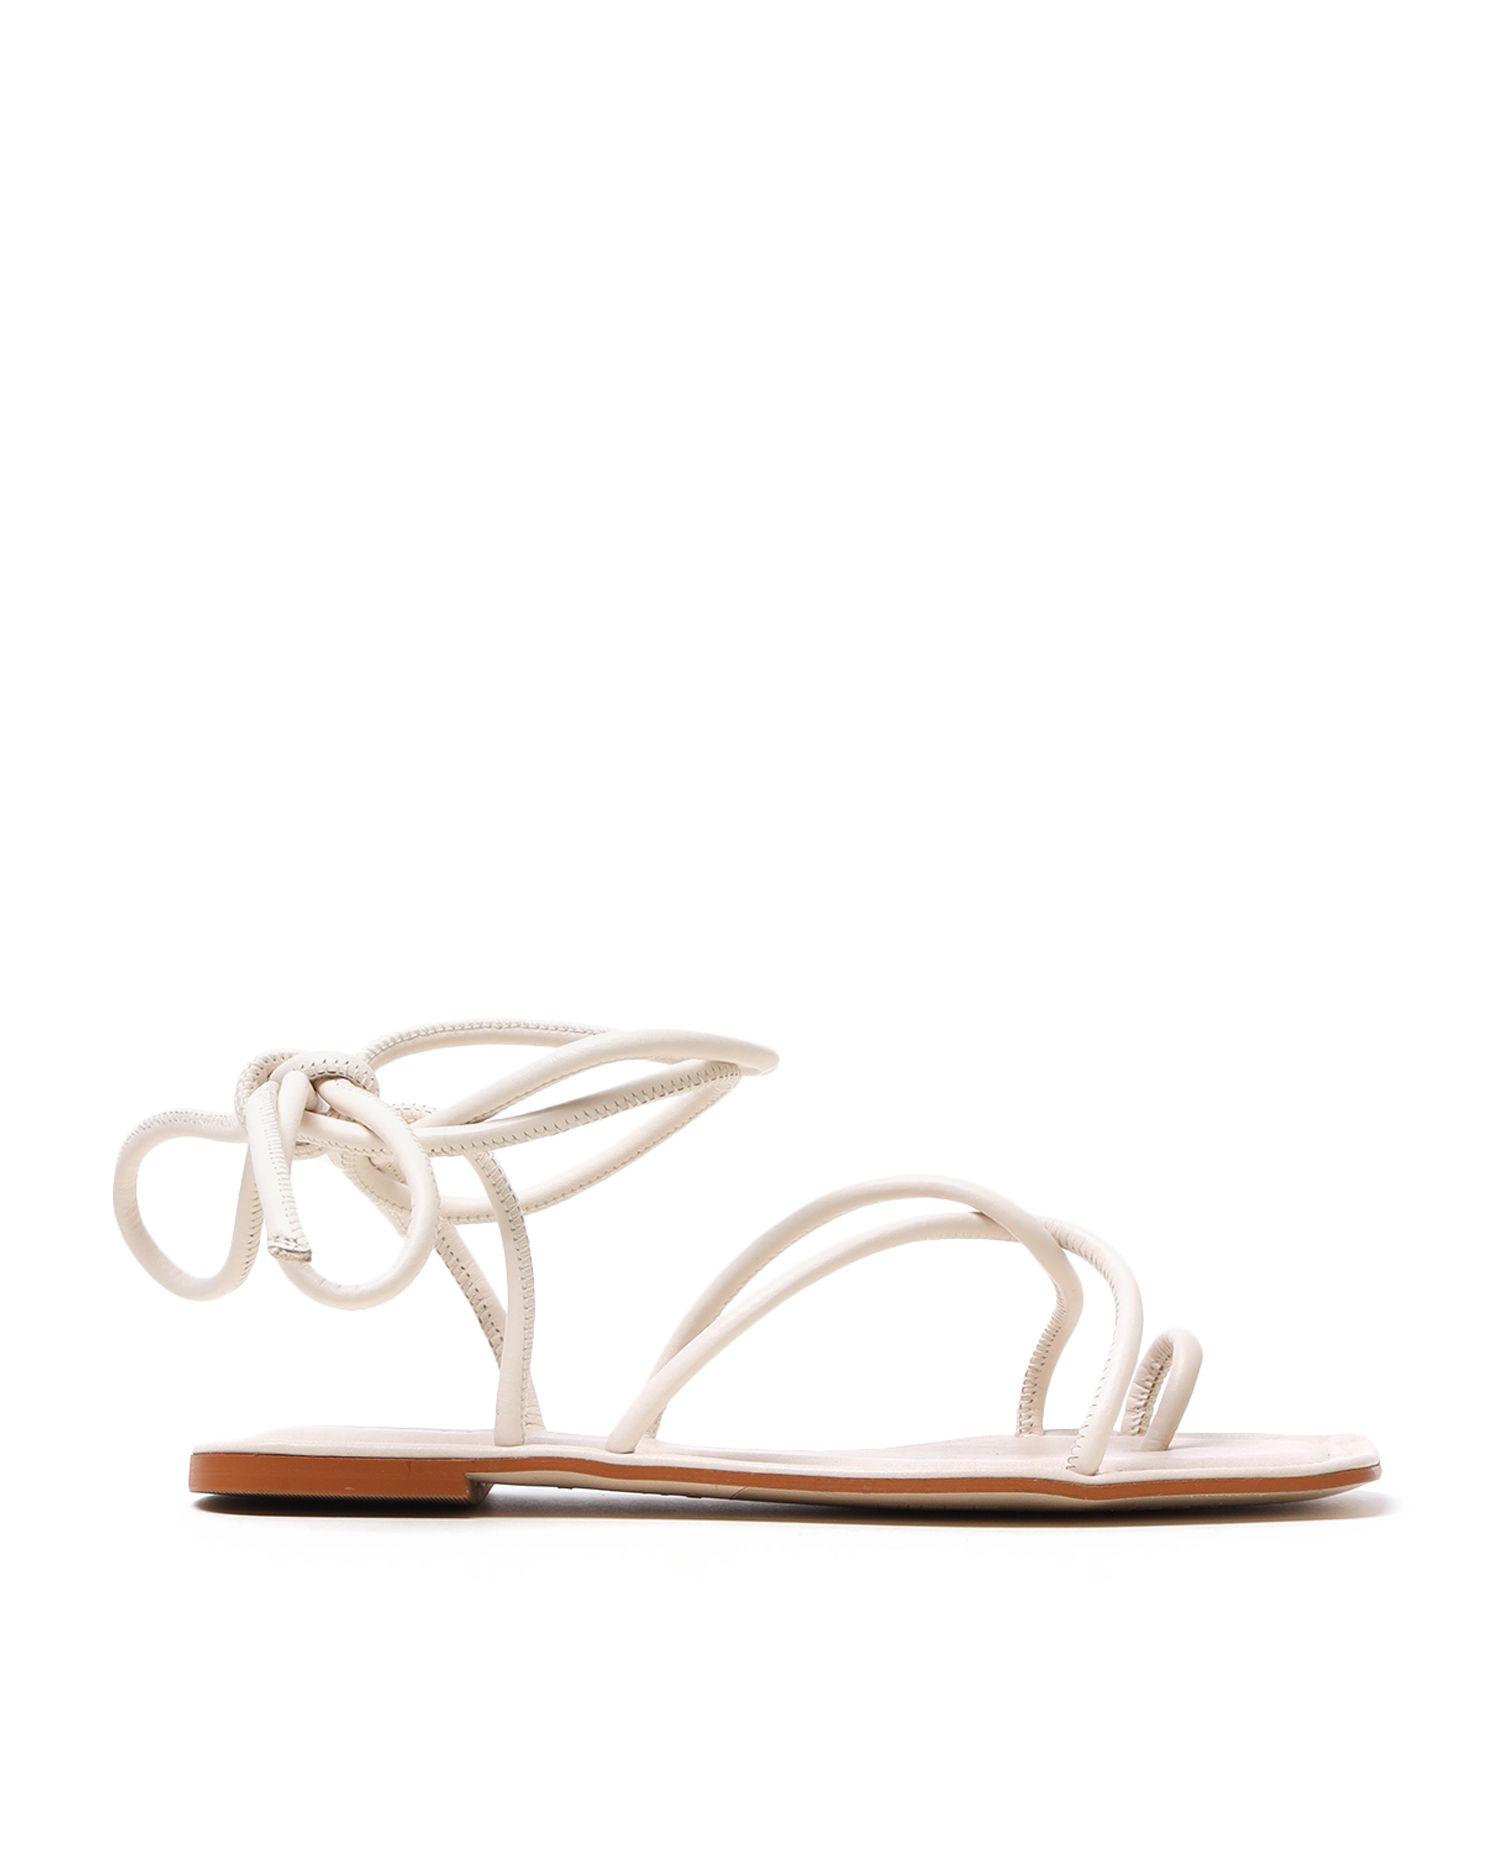 Strappy flat sandals by ALOHAS